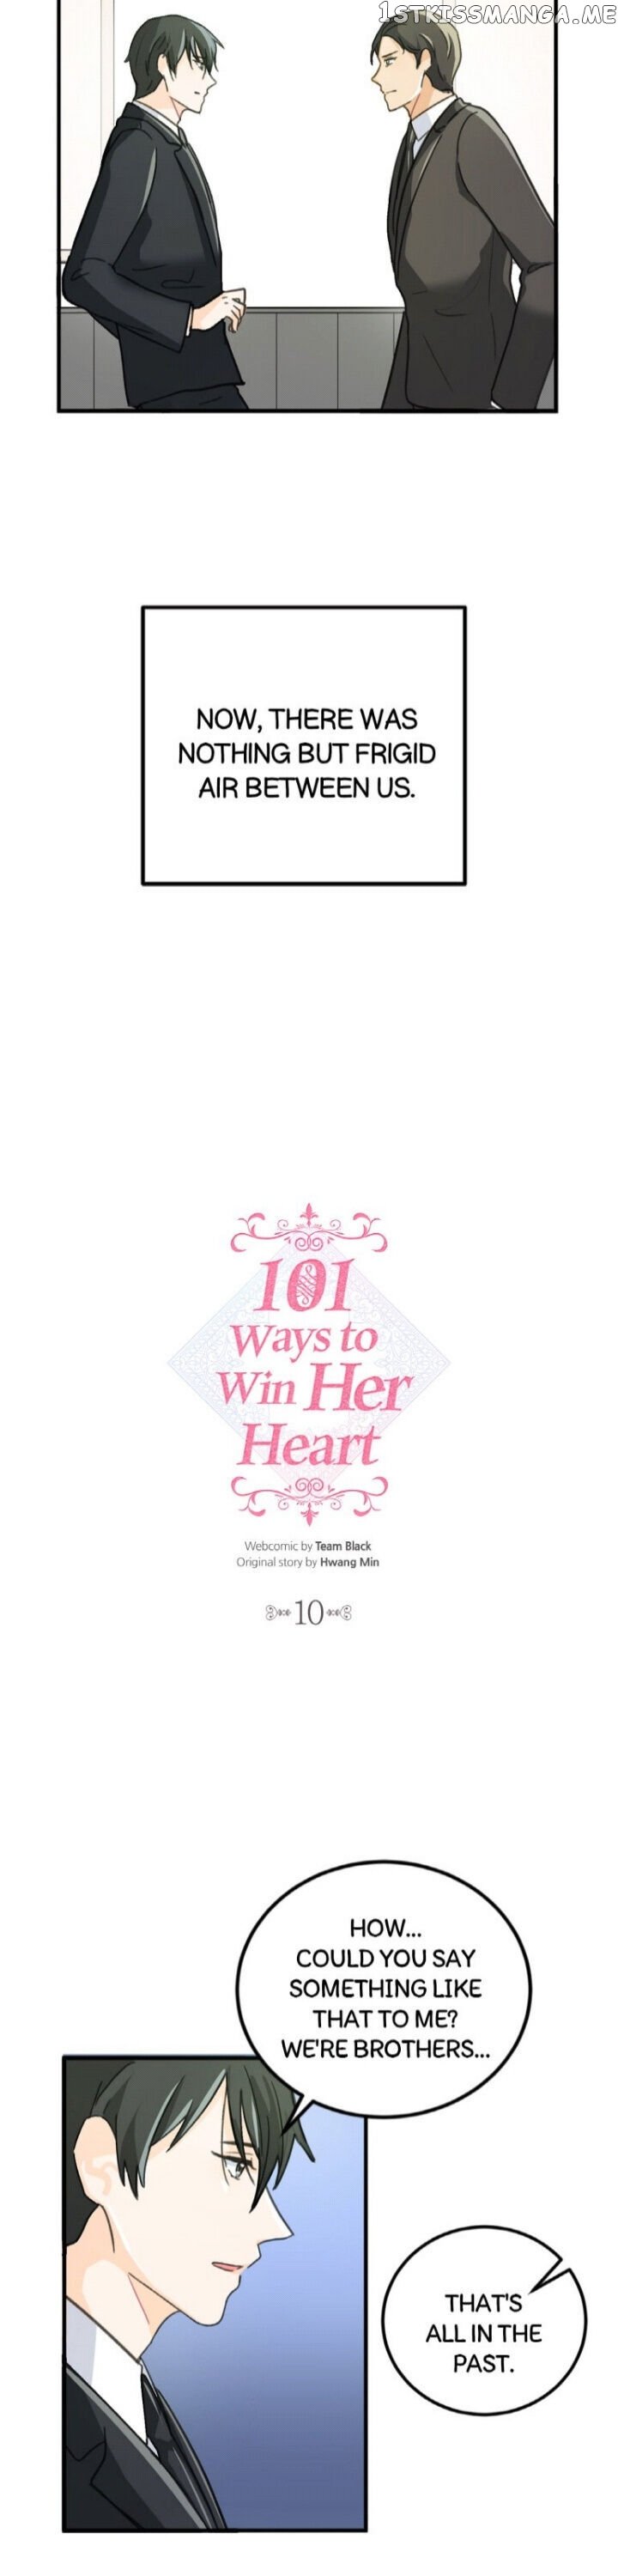 101 Ways to Win Her Heart chapter 10